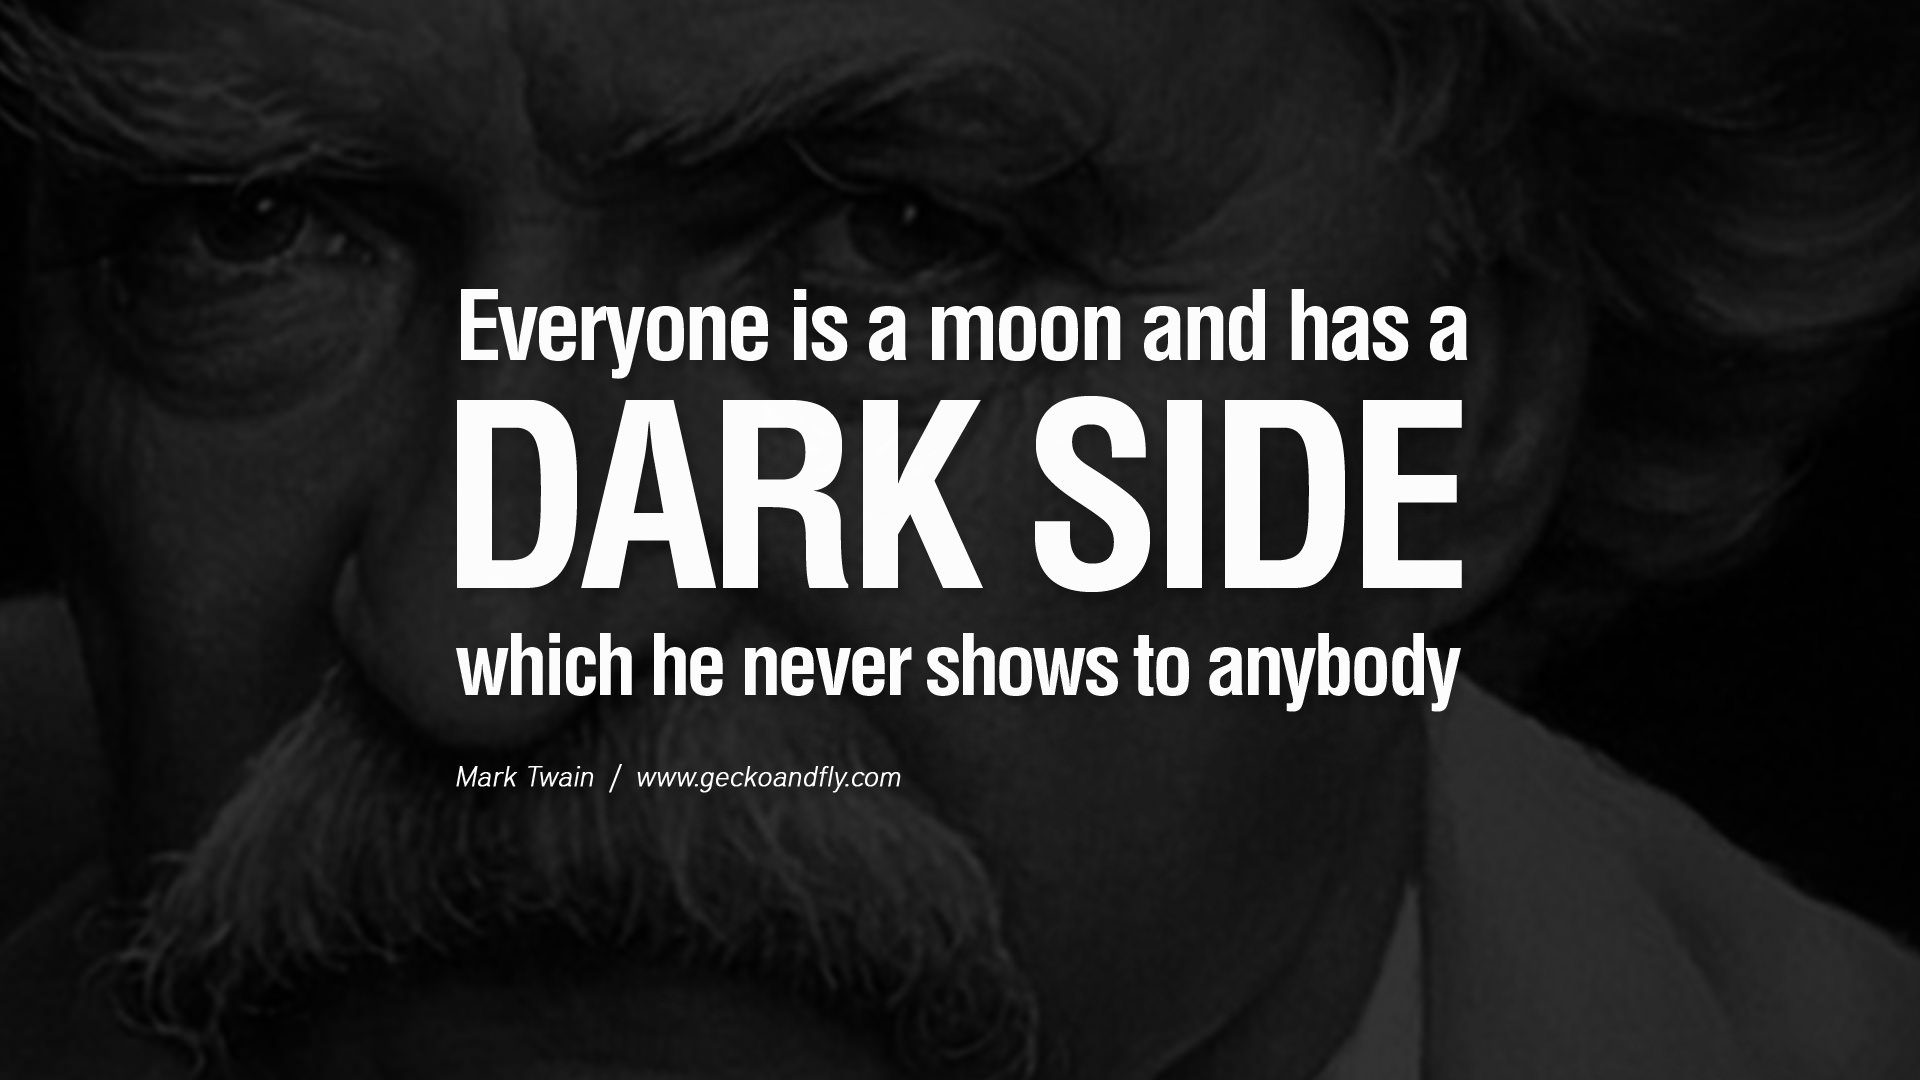 Everyone is a moon and has a dark side which he never shows to anybody. Mark Twain